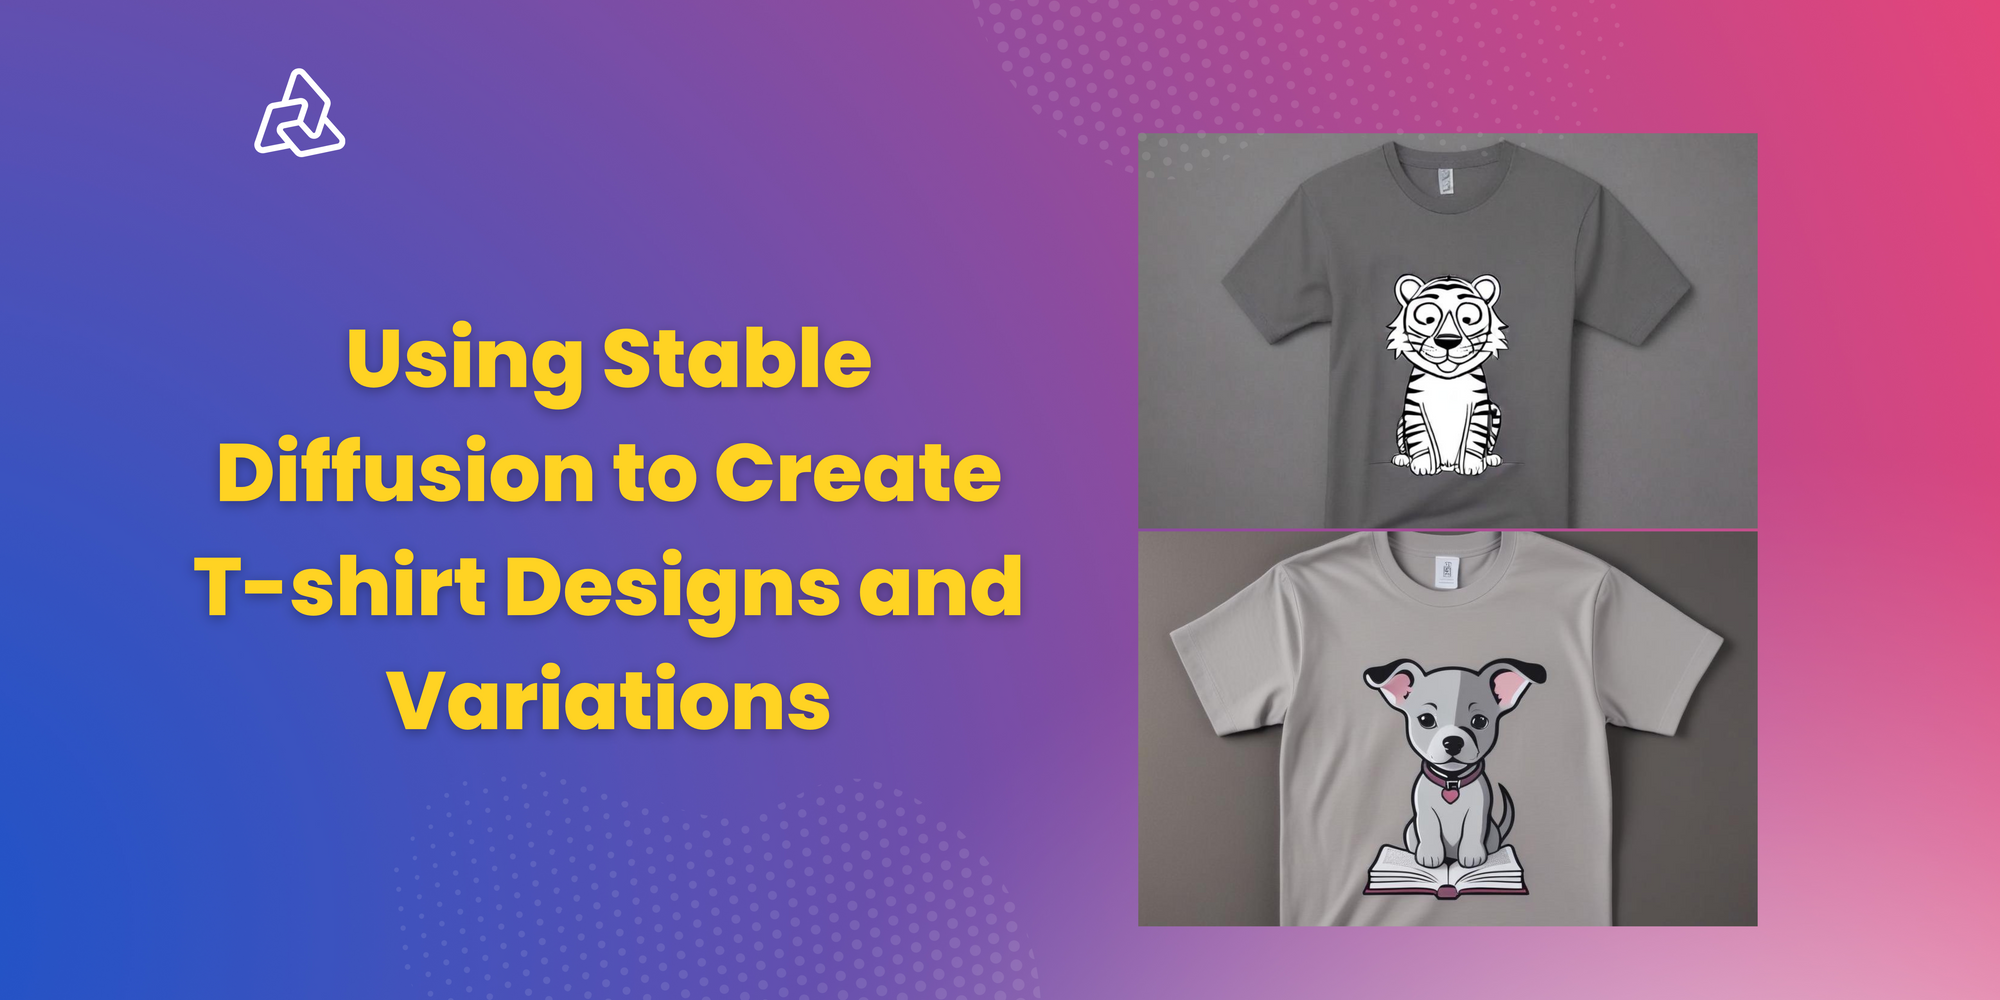 Using Stable Diffusion to Create T-shirt Designs and Variations